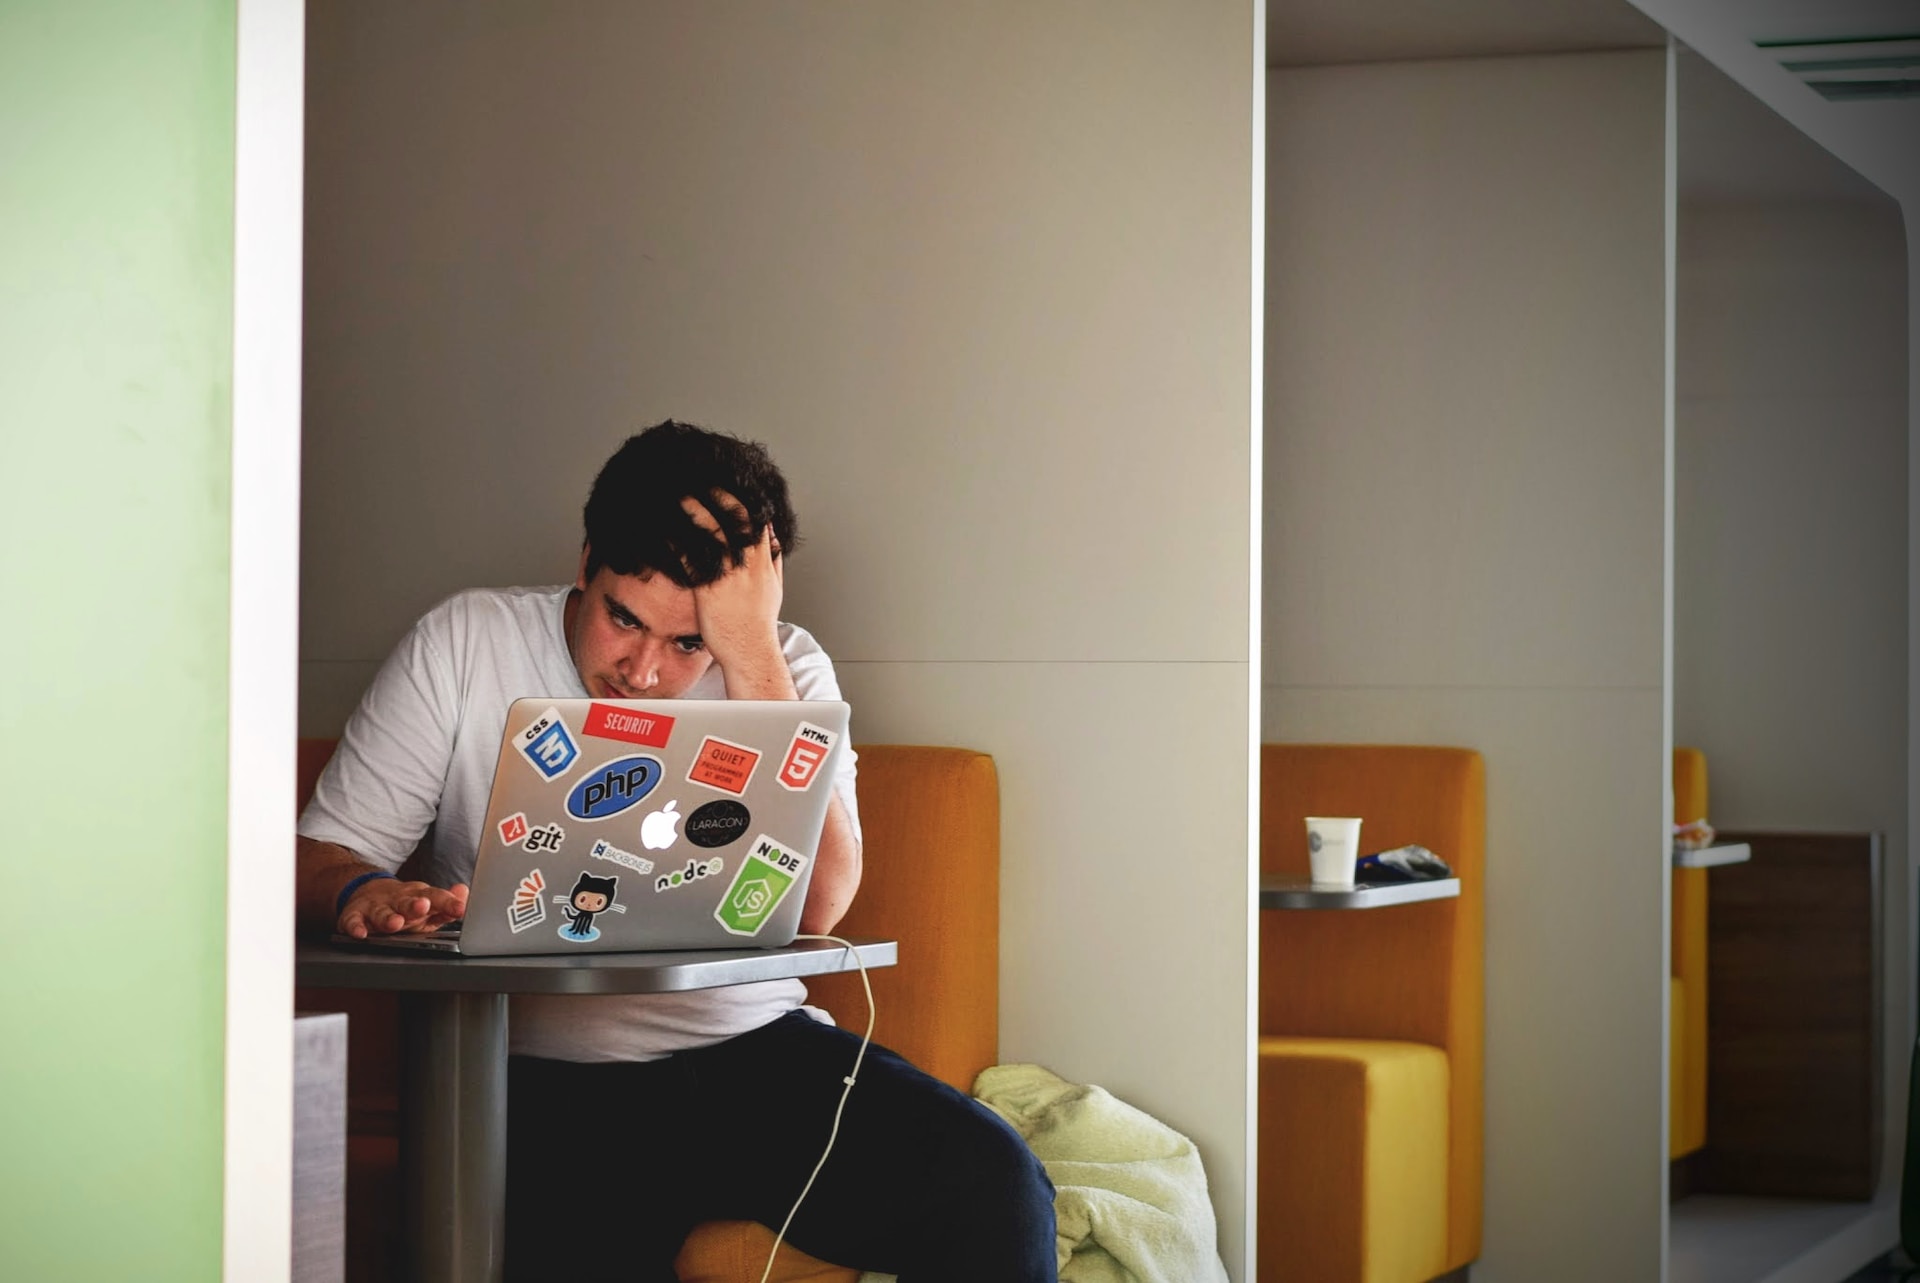 A man pulling his hair staring at a laptop which has been decorated with colourful stickers